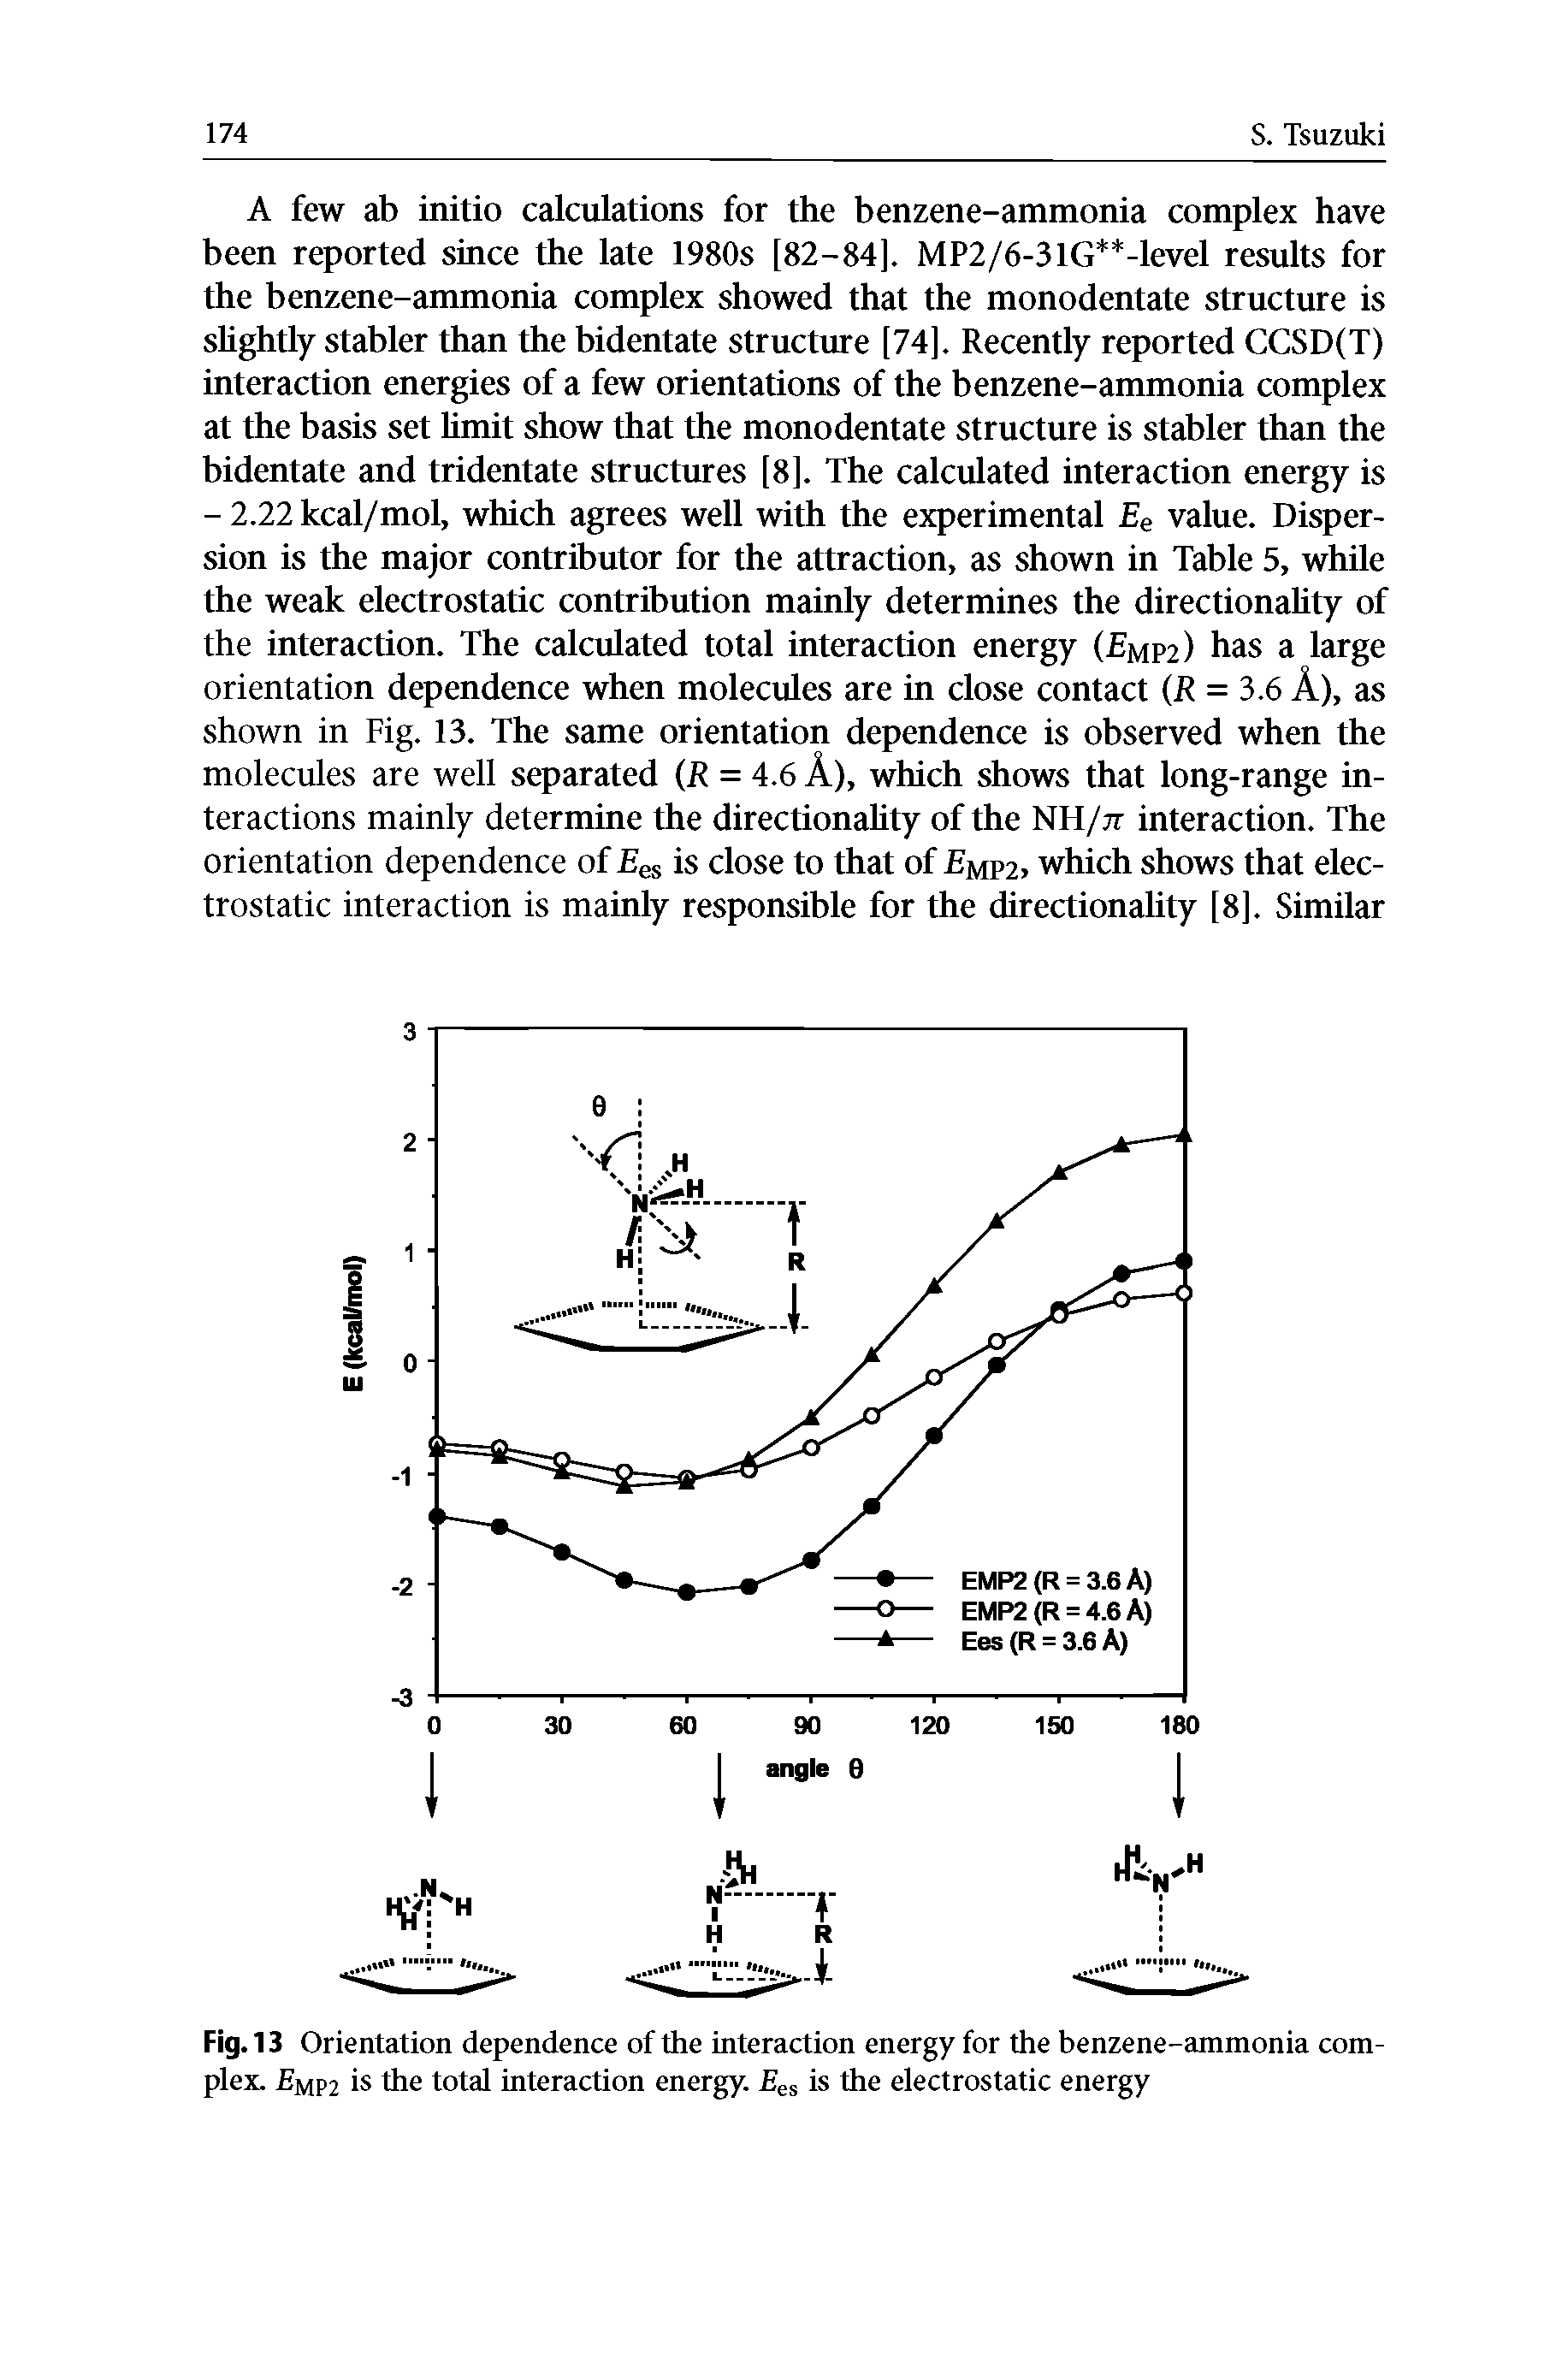 Fig. 13 Orientation dependence of the interaction energy for the benzene-ammonia complex. mp2 is the total interaction energy. es is the electrostatic energy...